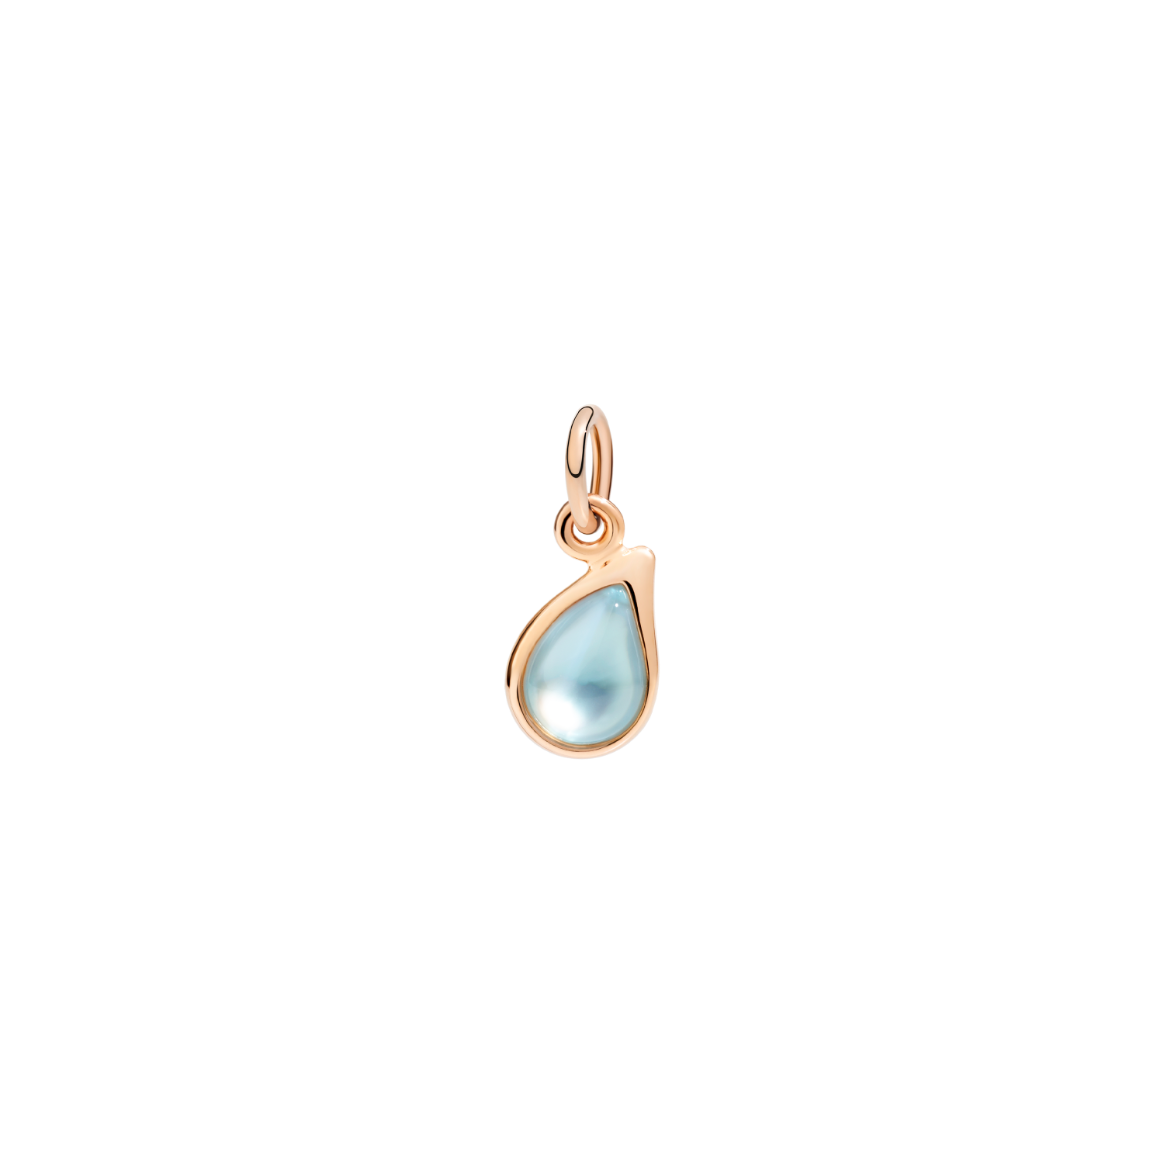 DMB8039_DROPS_GLA9R_010_Dodo_teardrop-charm-9k-rose-gold-turquoise-enamel-recycled-glass-mother-of-pearl.png